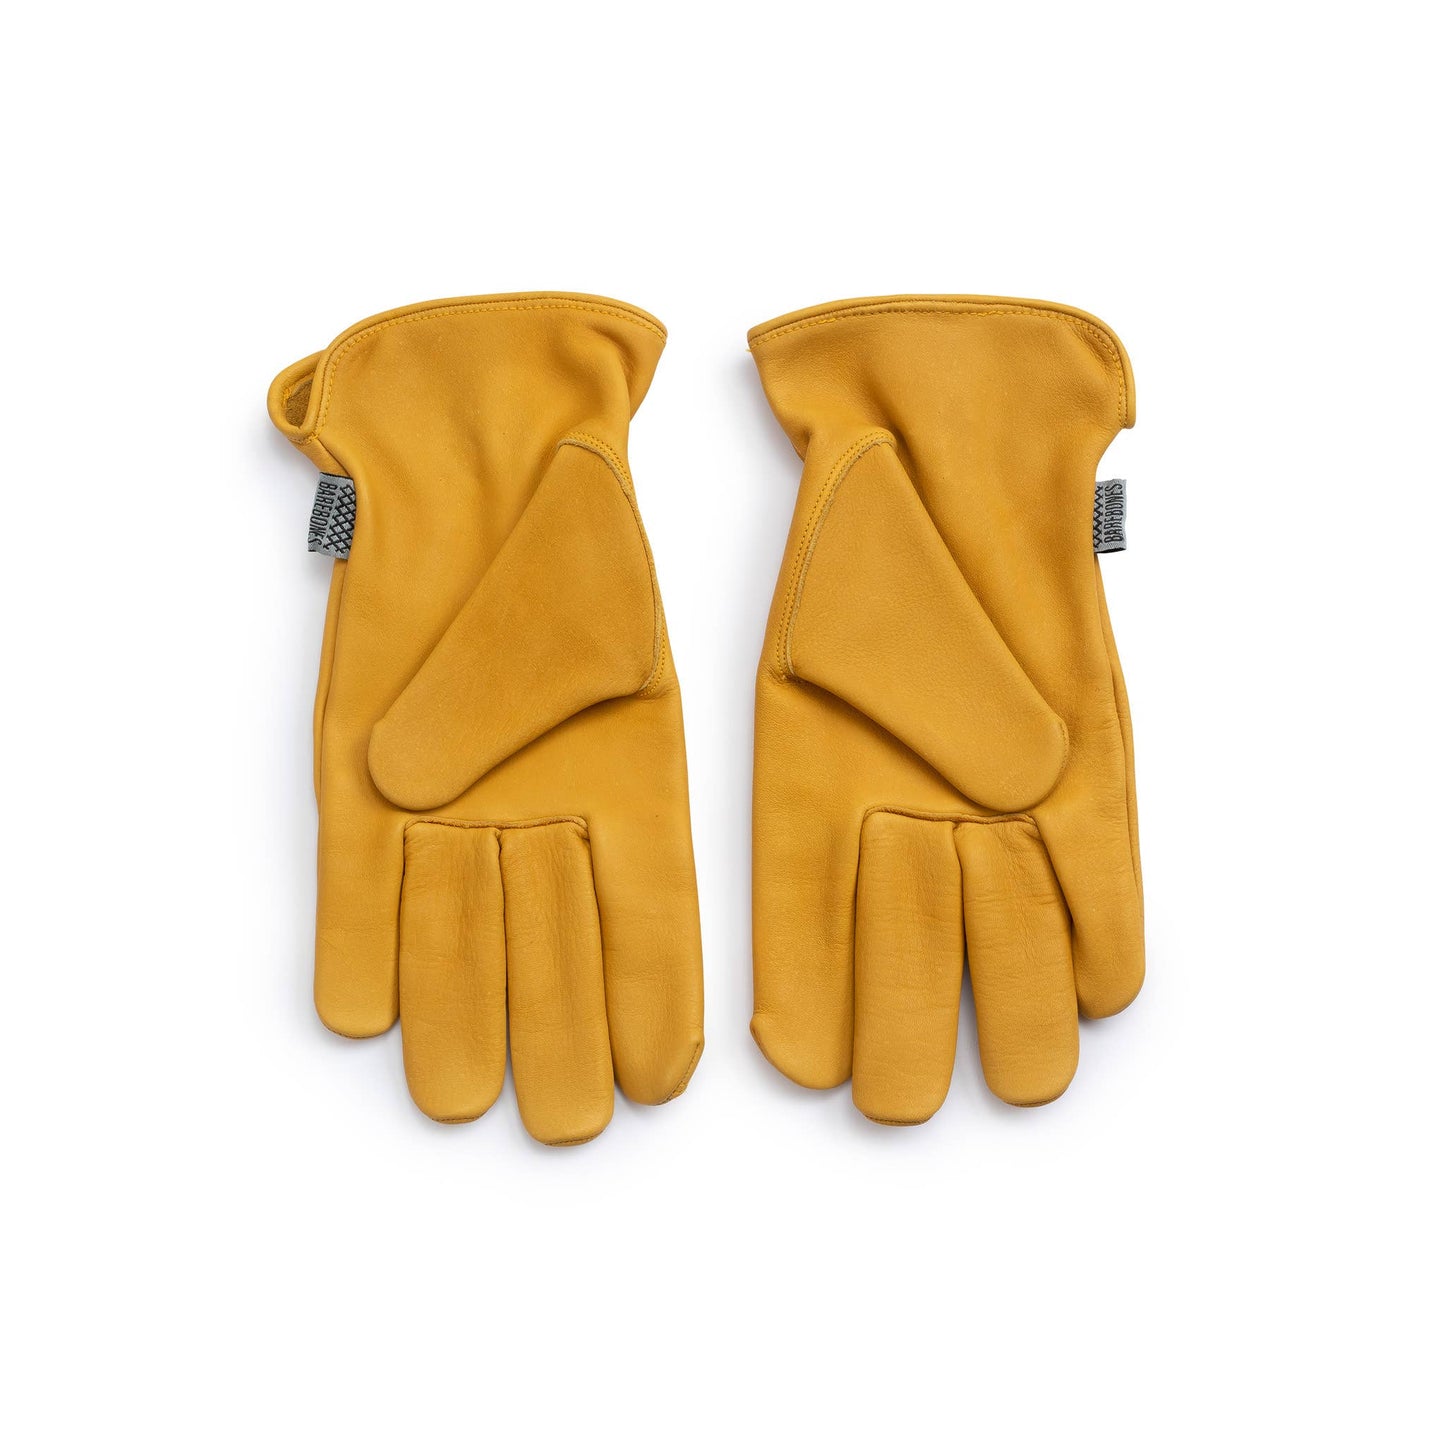 Classic Work Gloves: L/XL / Natural Yellow